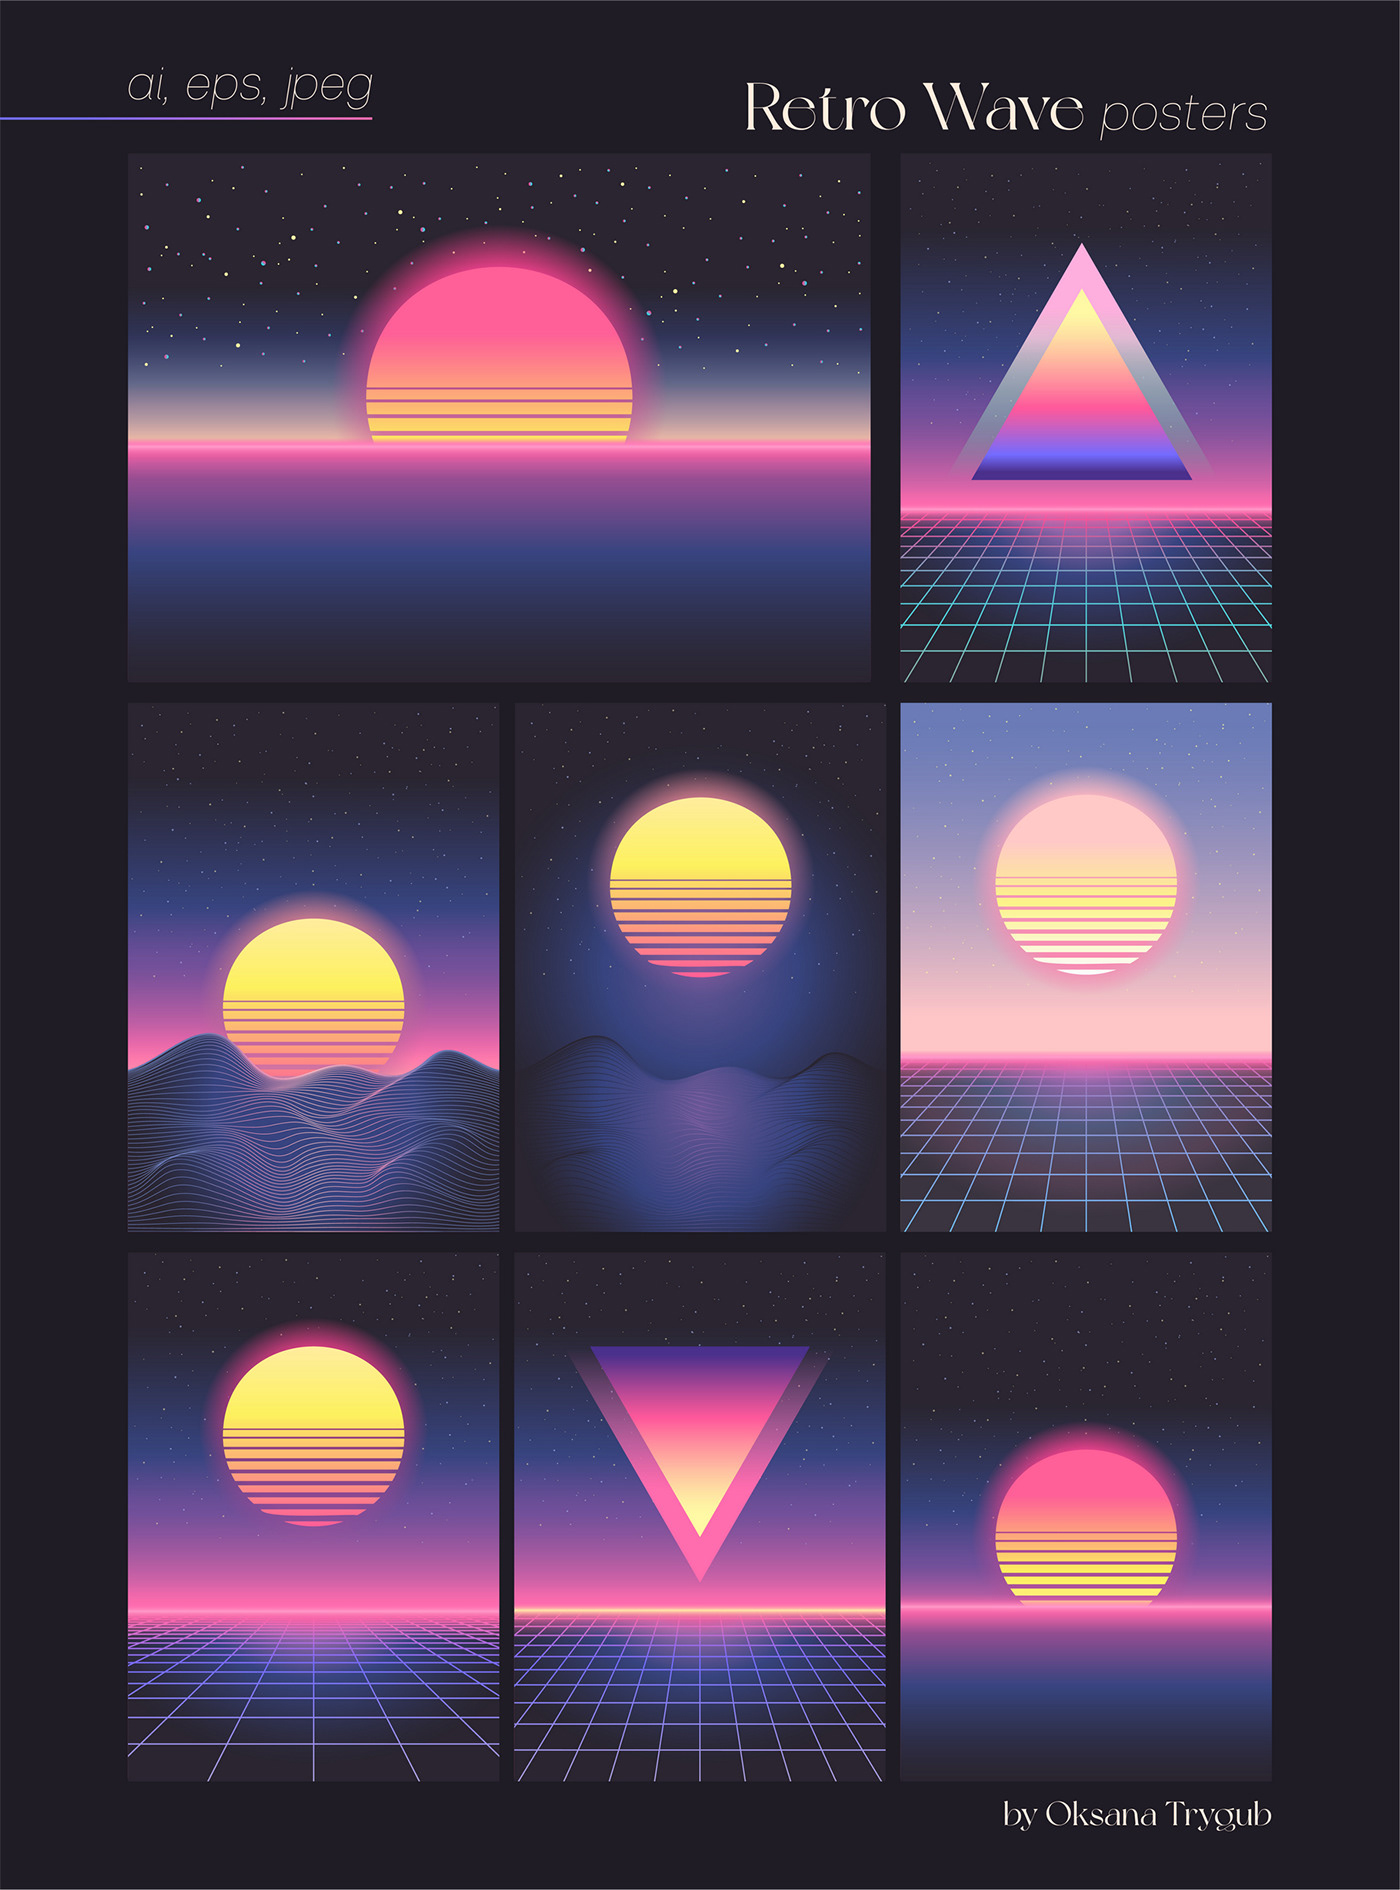 80s cyber poster punk Retro retrowave SYNTH Synthwave vaporwave wave